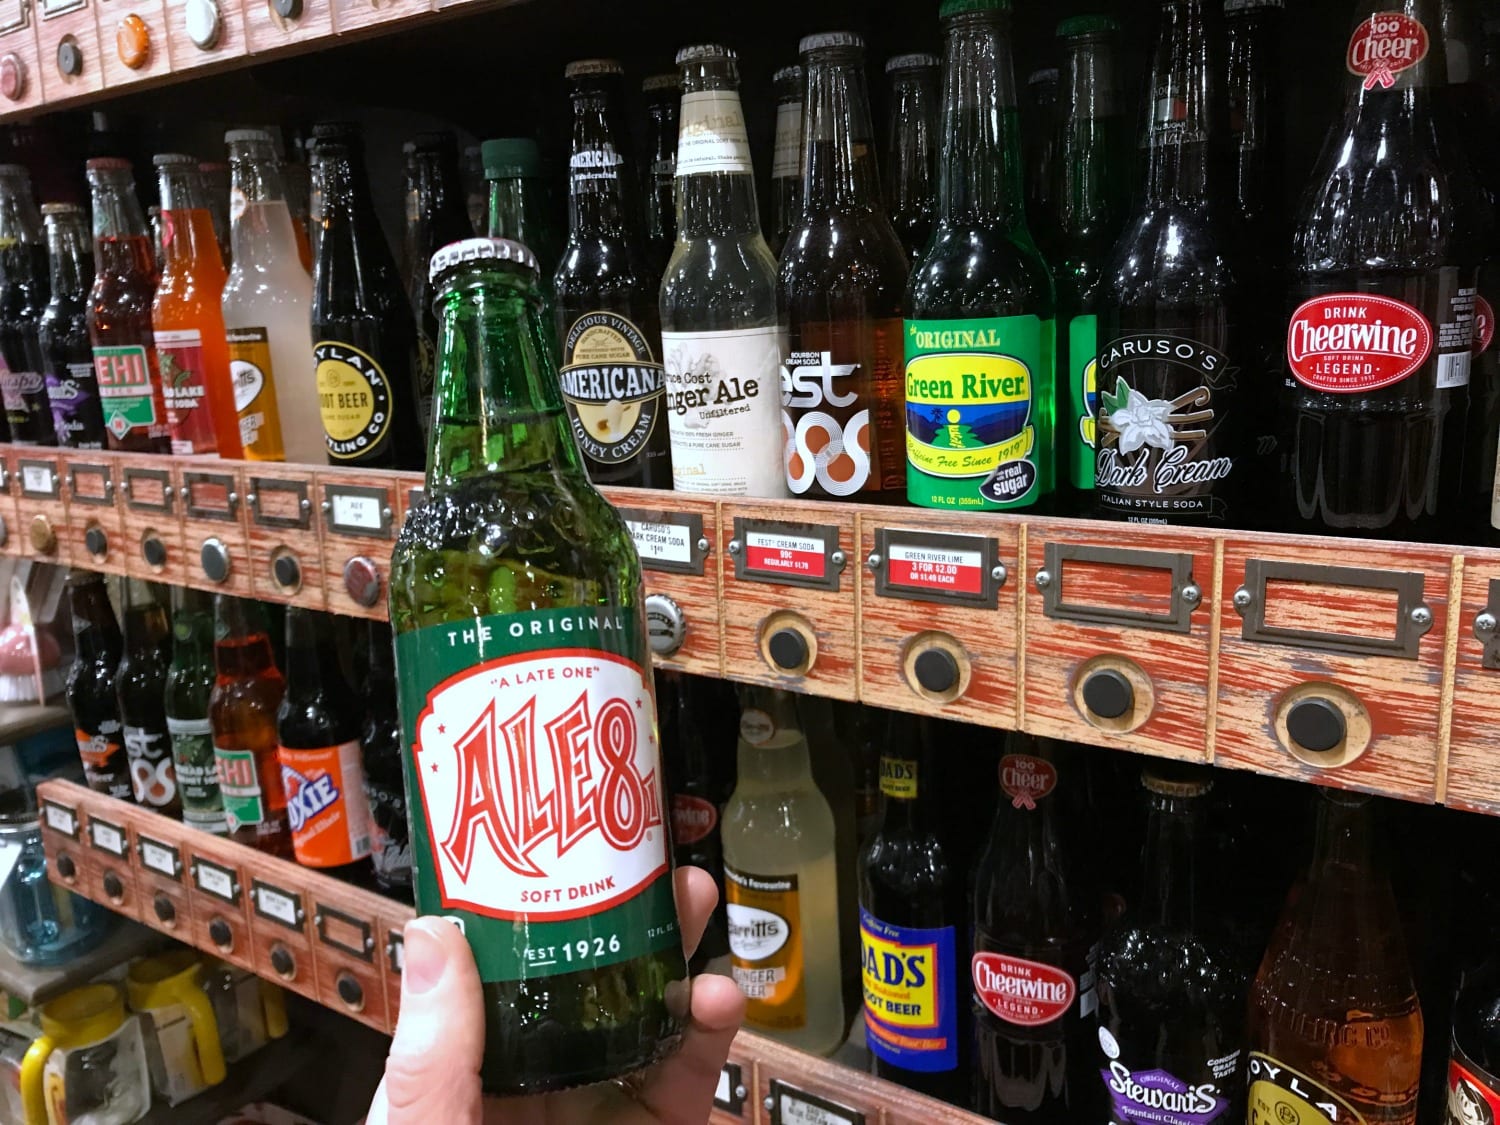 You can buy Ale-8-1 at Cracker Barrel stores!